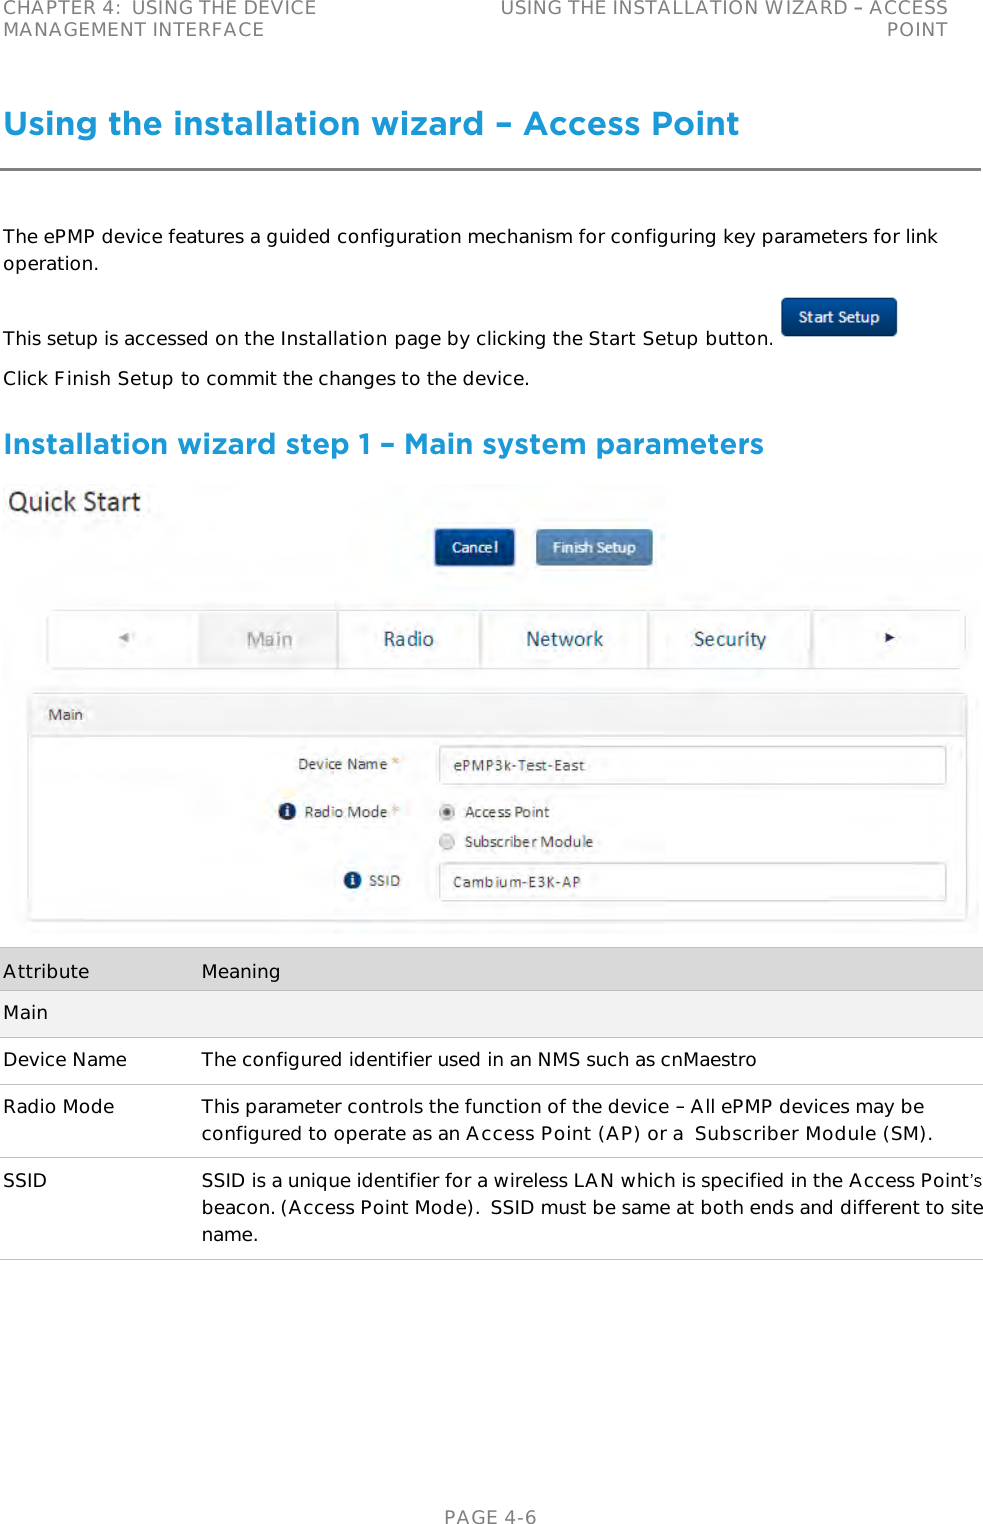 CHAPTER 4:  USING THE DEVICE MANAGEMENT INTERFACE USING THE INSTALLATION WIZARD   ACCESS POINT   PAGE 4-6 Using the installation wizard – Access Point The ePMP device features a guided configuration mechanism for configuring key parameters for link operation. This setup is accessed on the Installation page by clicking the Start Setup button.  Click Finish Setup to commit the changes to the device. Installation wizard step 1 – Main system parameters  Attribute Meaning Main Device Name The configured identifier used in an NMS such as cnMaestro Radio Mode This parameter controls the function of the device   All ePMP devices may be configured to operate as an Access Point (AP) or a  Subscriber Module (SM). SSID SSID is a unique identifier for a wireless LAN which is specified in the Access Pointbeacon. (Access Point Mode).  SSID must be same at both ends and different to site name. 